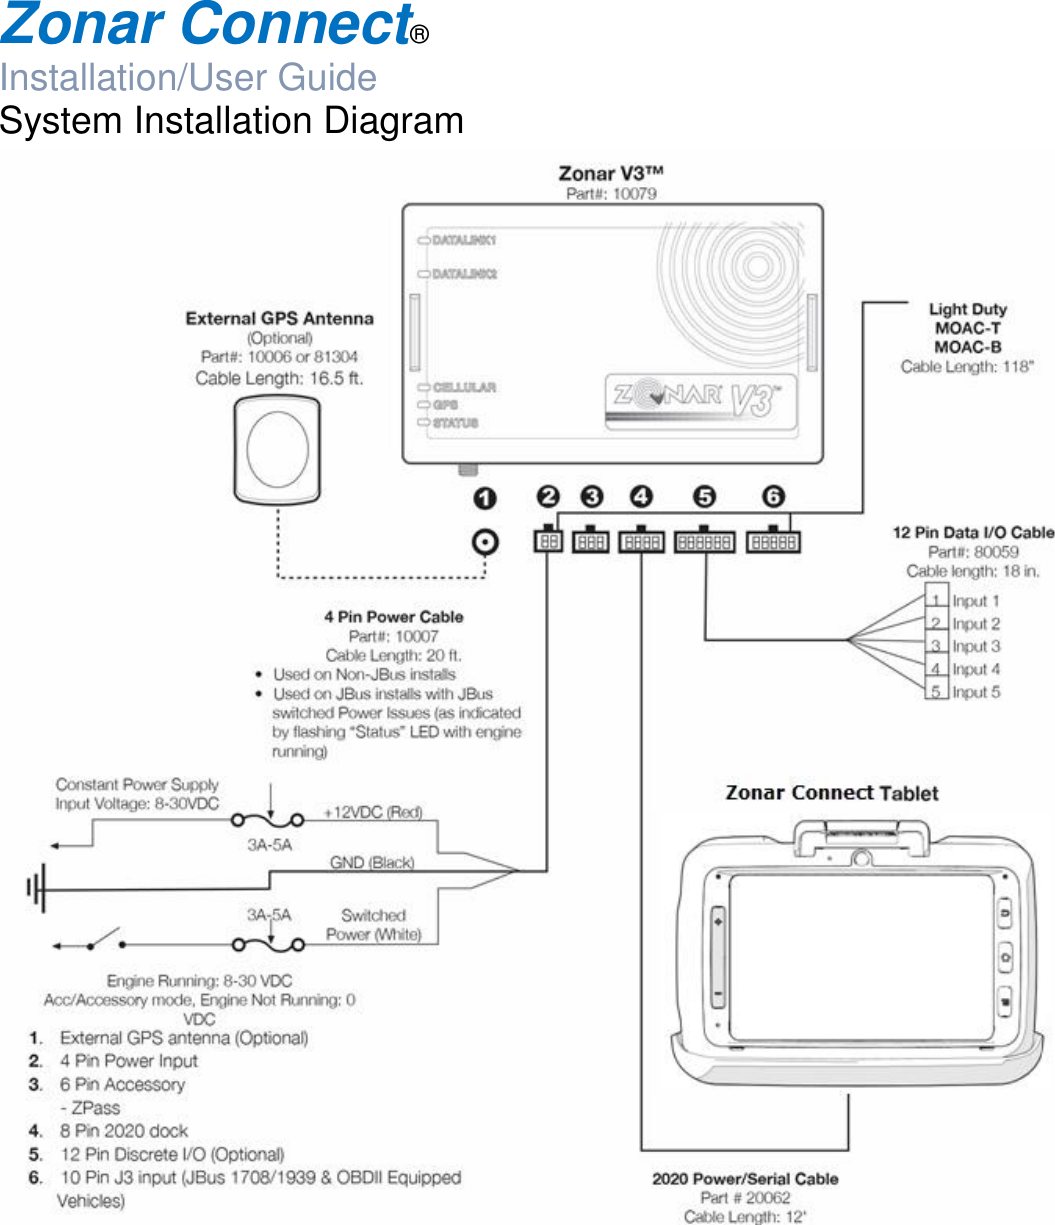  Zonar Connect®  Installation/User Guide System Installation Diagram  